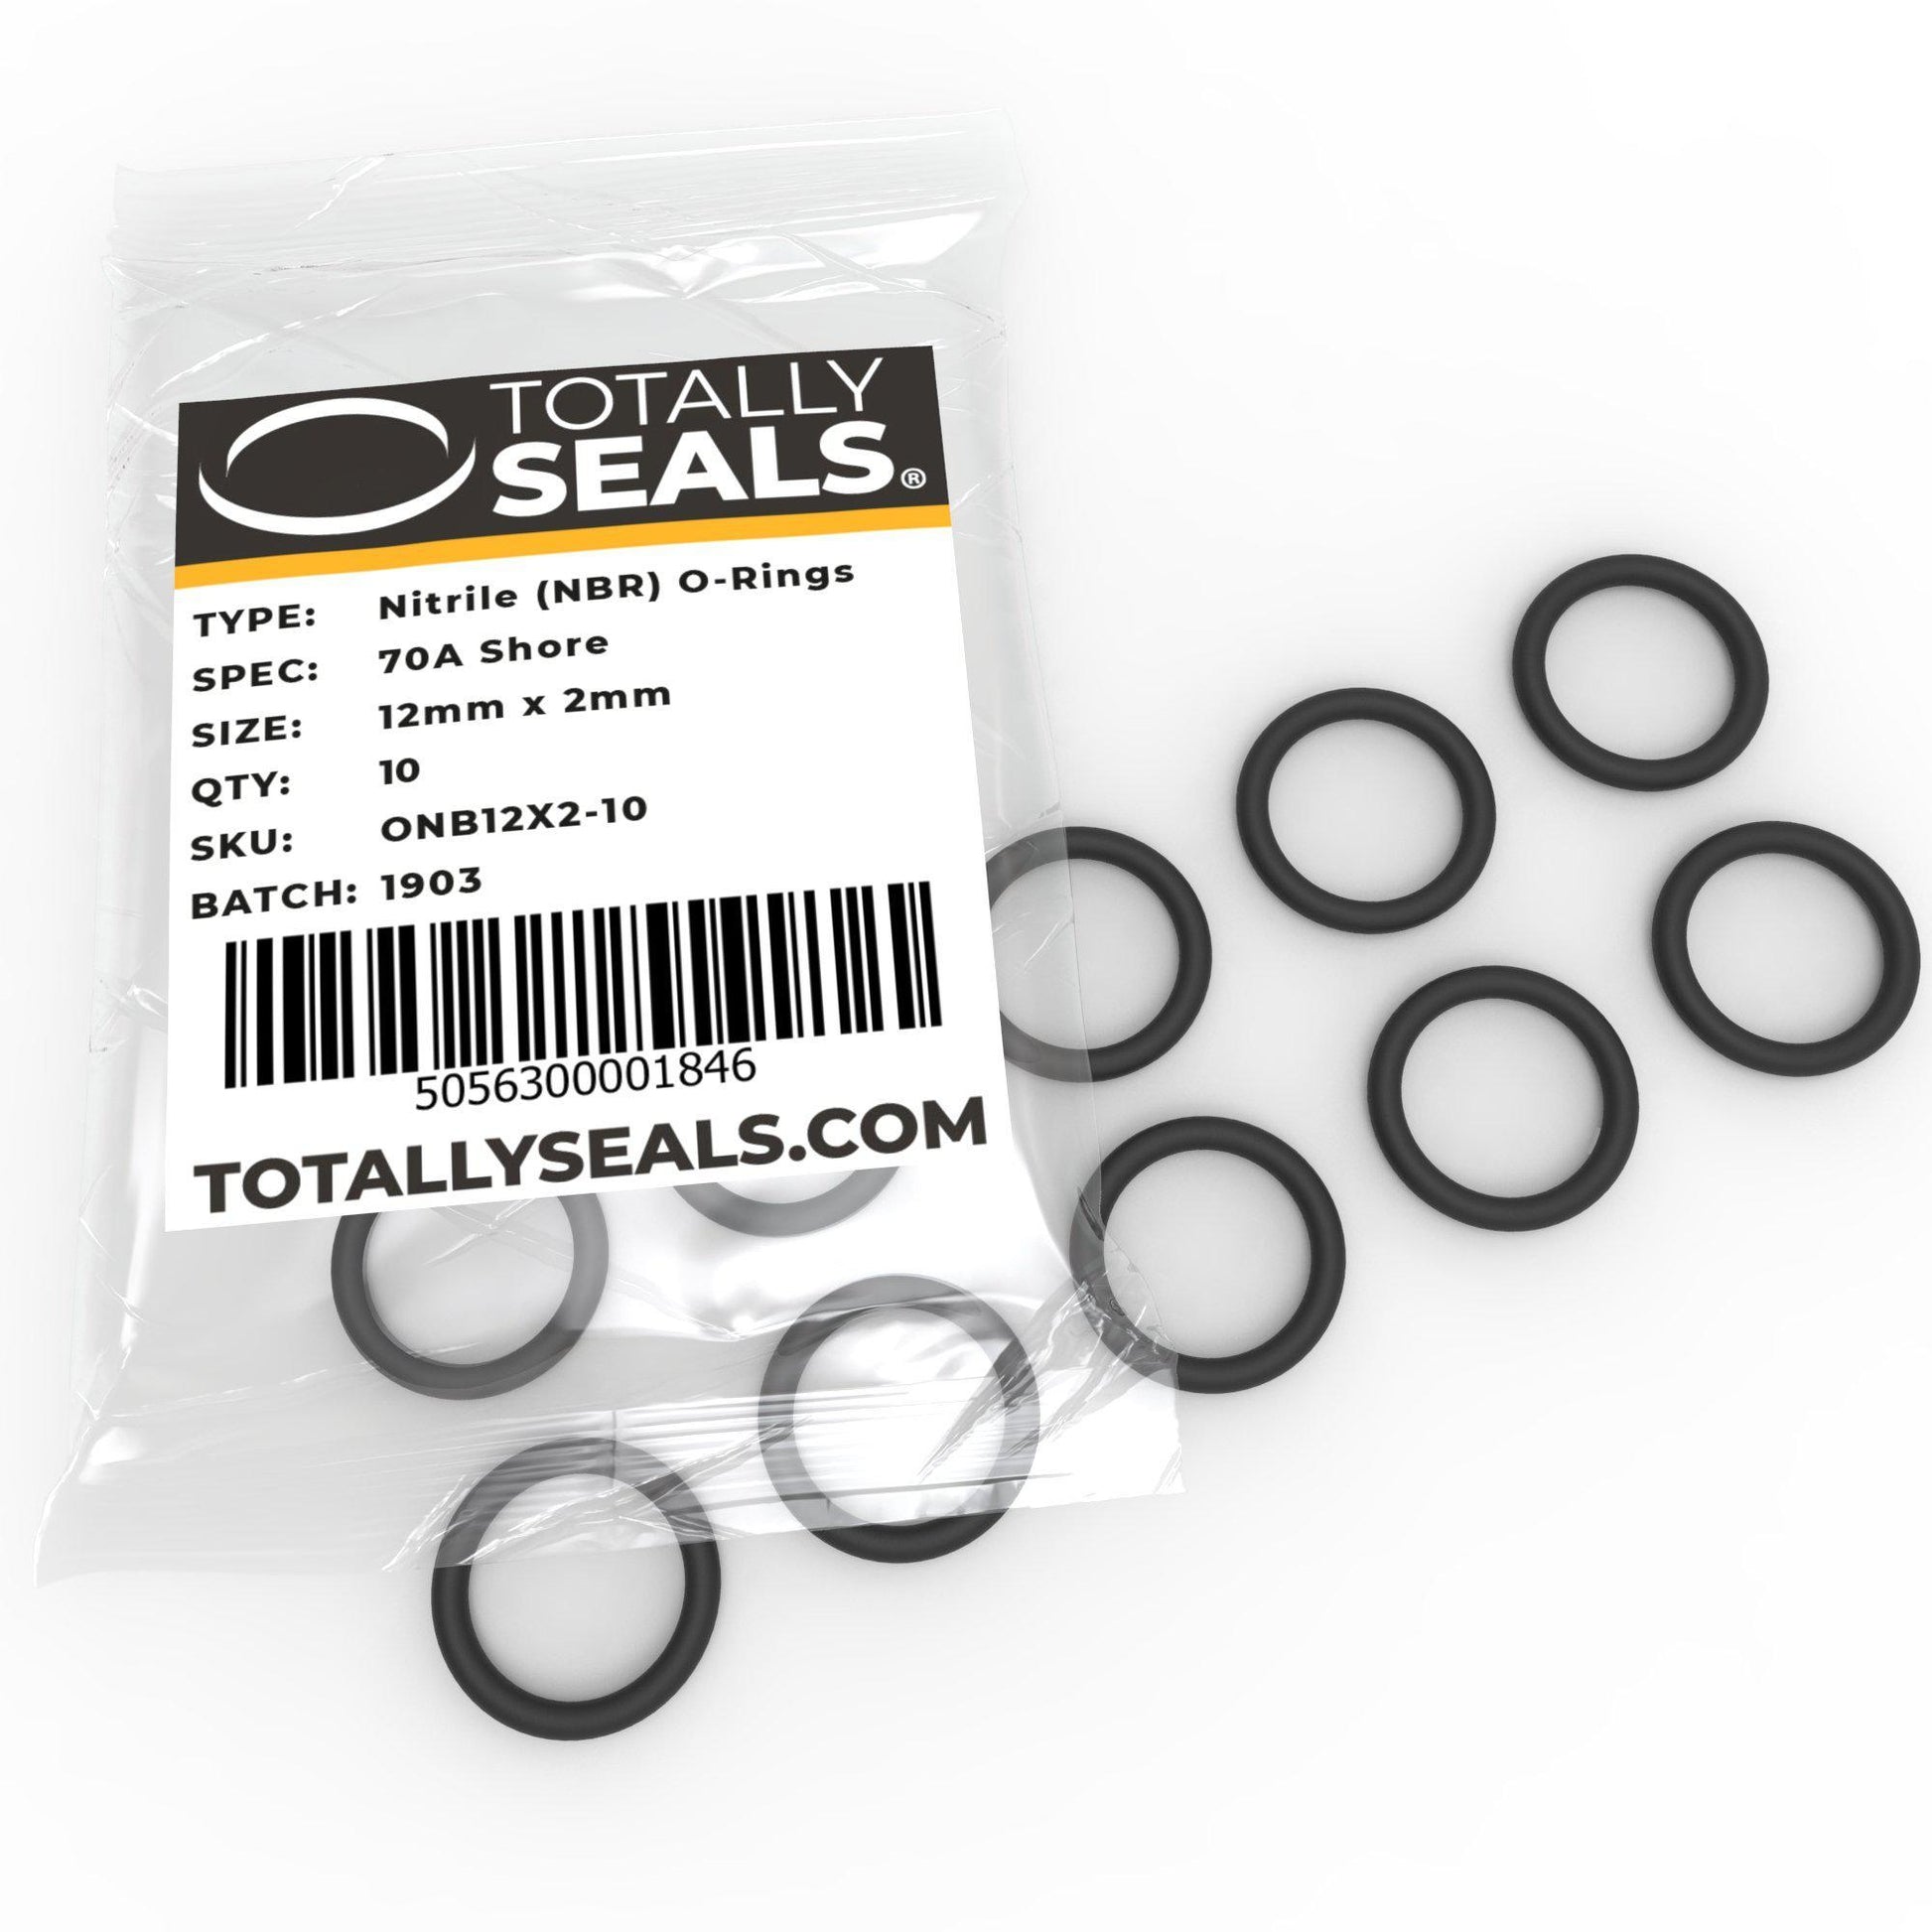 12mm x 2mm (16mm OD) Nitrile O-Rings - Totally Seals®